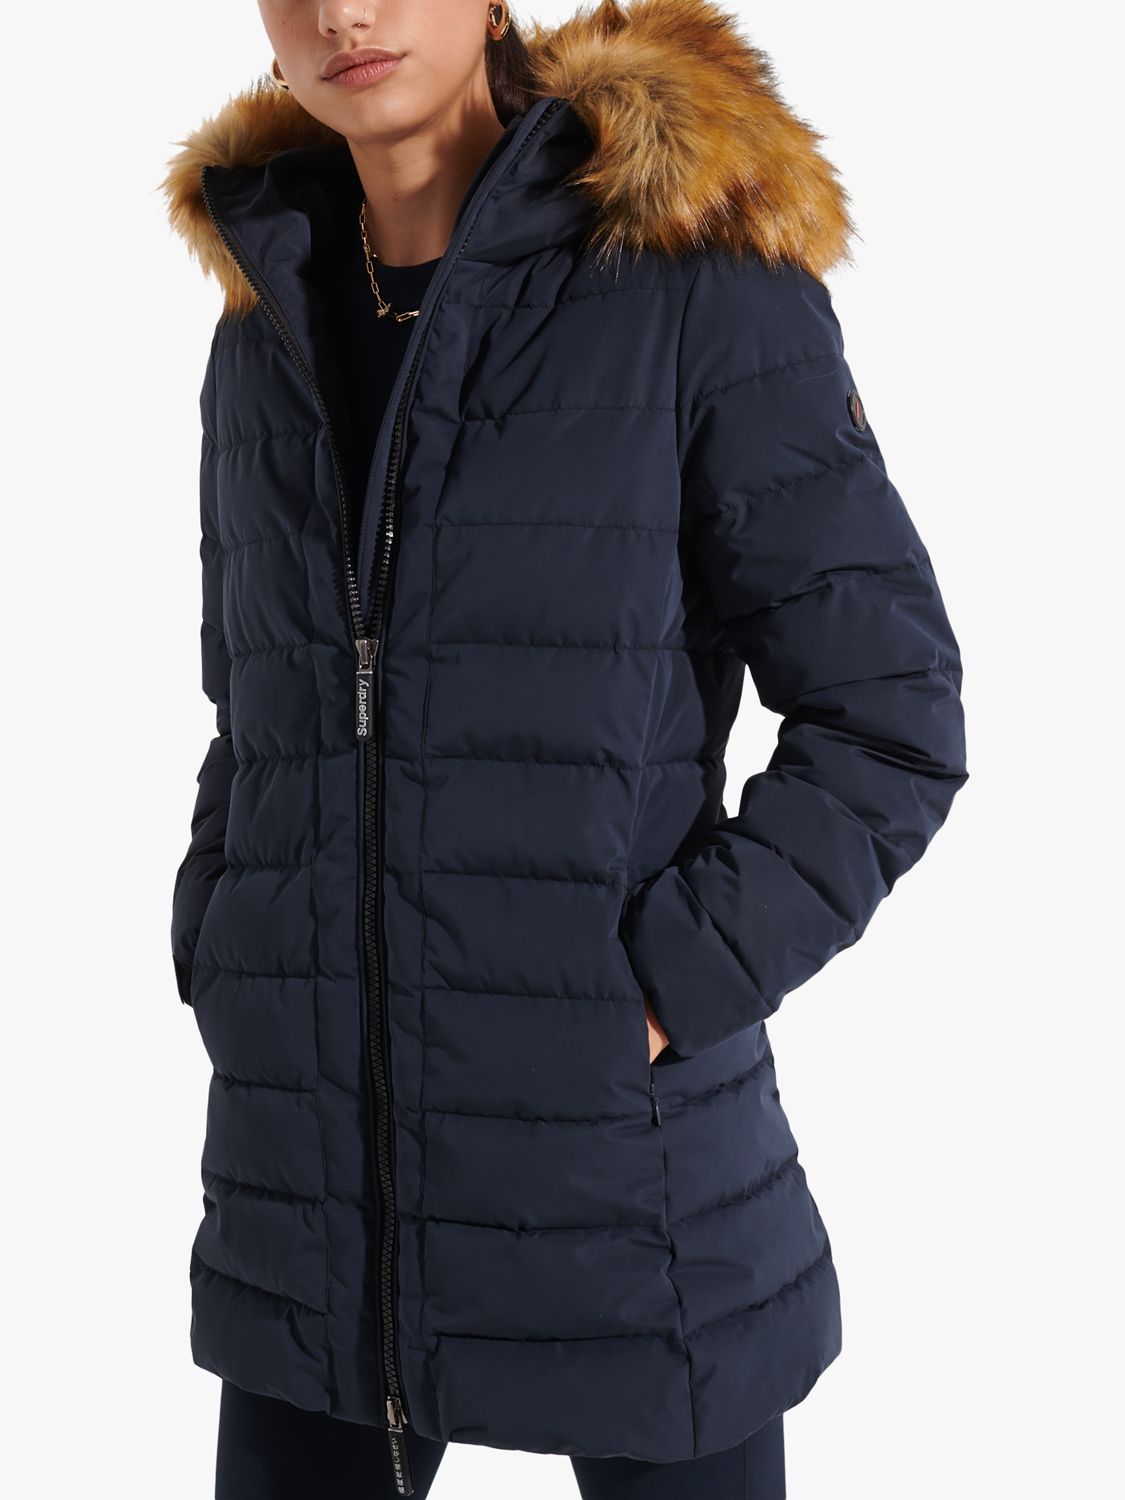 Superdry Arctic Tall Puffer Coat, Navy at John Lewis & Partners